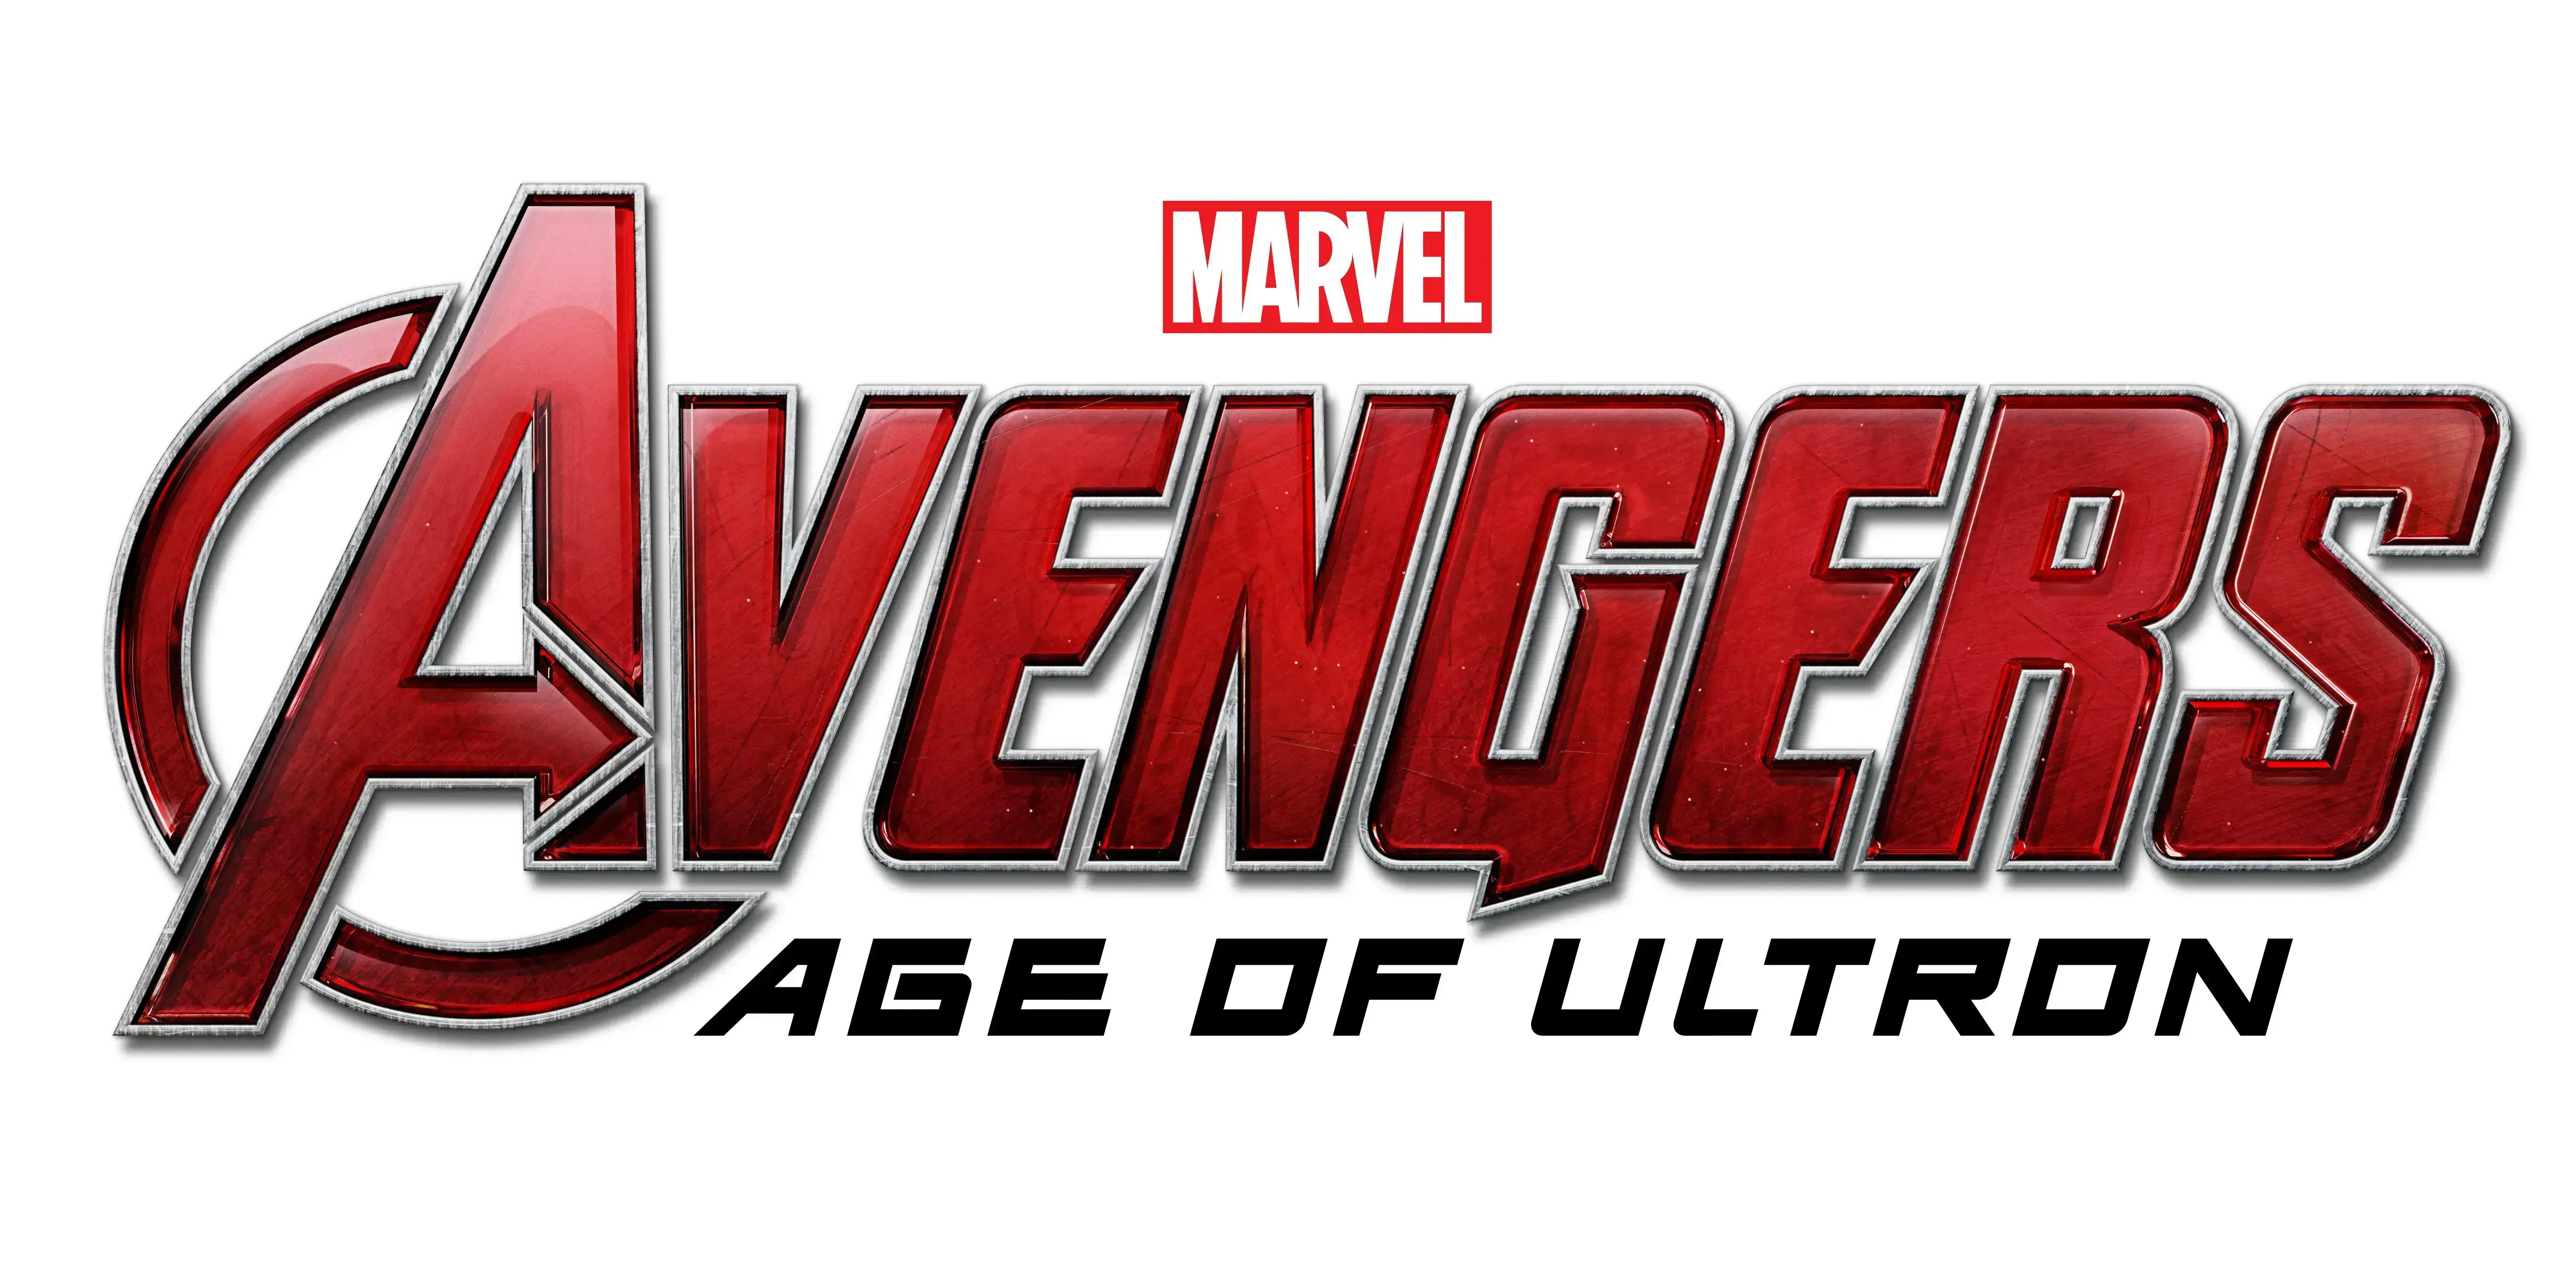 Movie Avengers Age of Ultron wallpaper 1 | Background Image